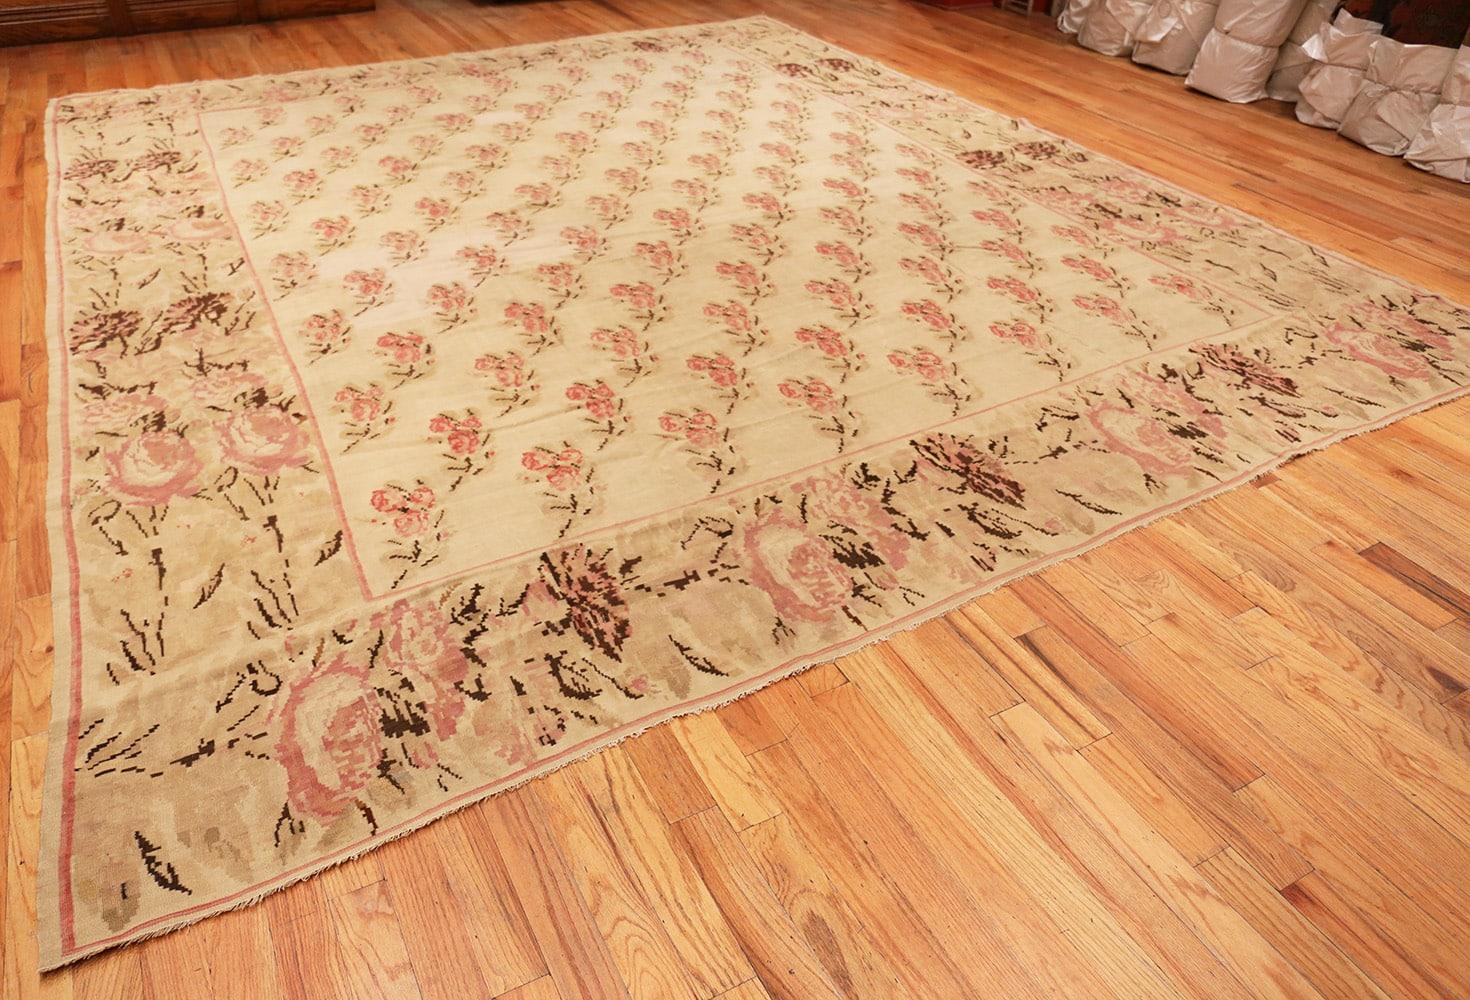 Beautiful antique Romanian Bessarabian Kilim rug, country of origin: Romania, date circa late 19th century. Size: 12 ft 9 in x 14 ft 3 in (3.89 m x 4.34 m)

Inspired by the motifs and coloration of Classic French Aubusson tapestry, sprays of roses